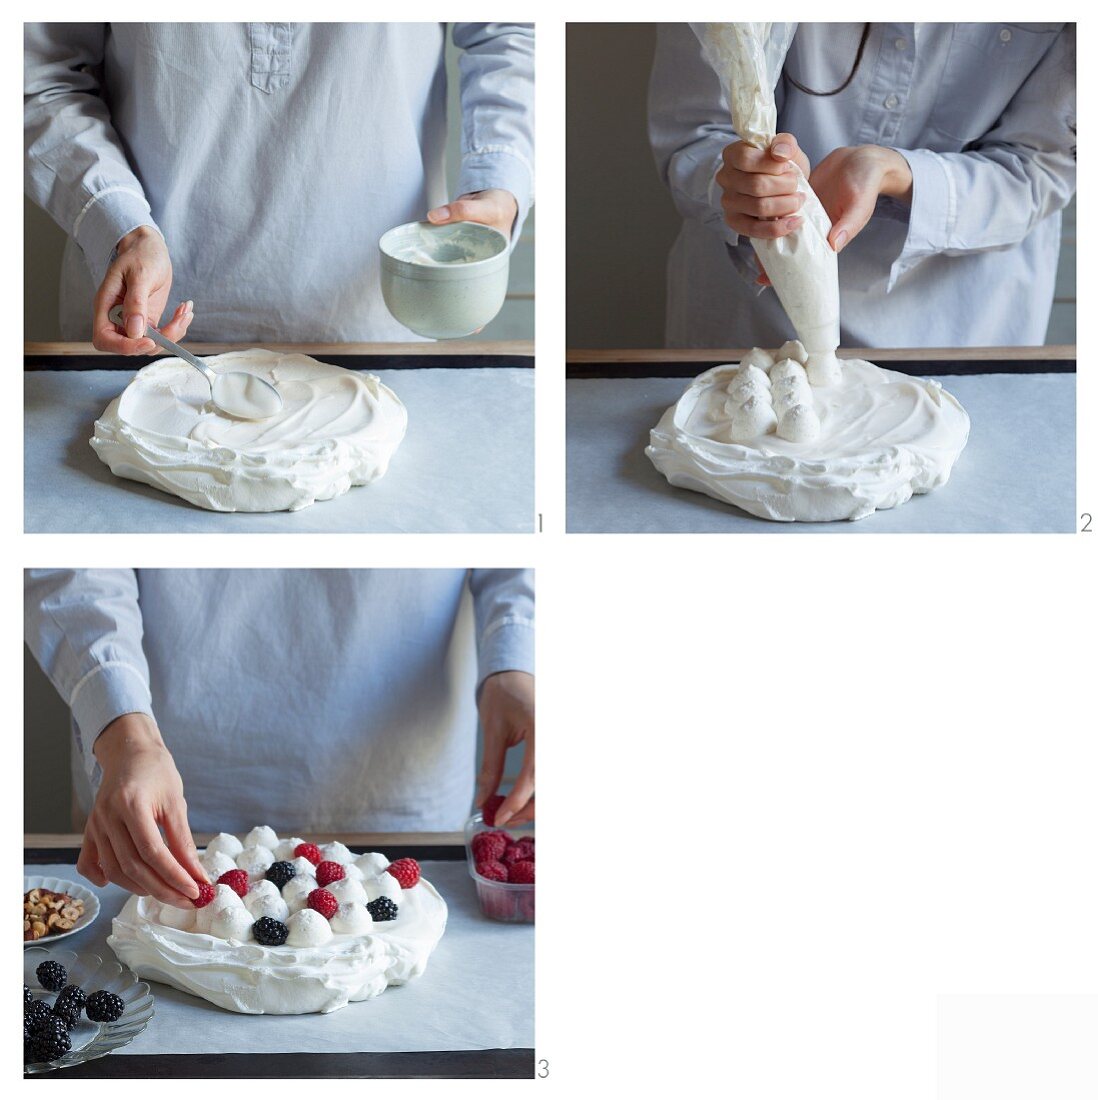 How to make pavlova with berries